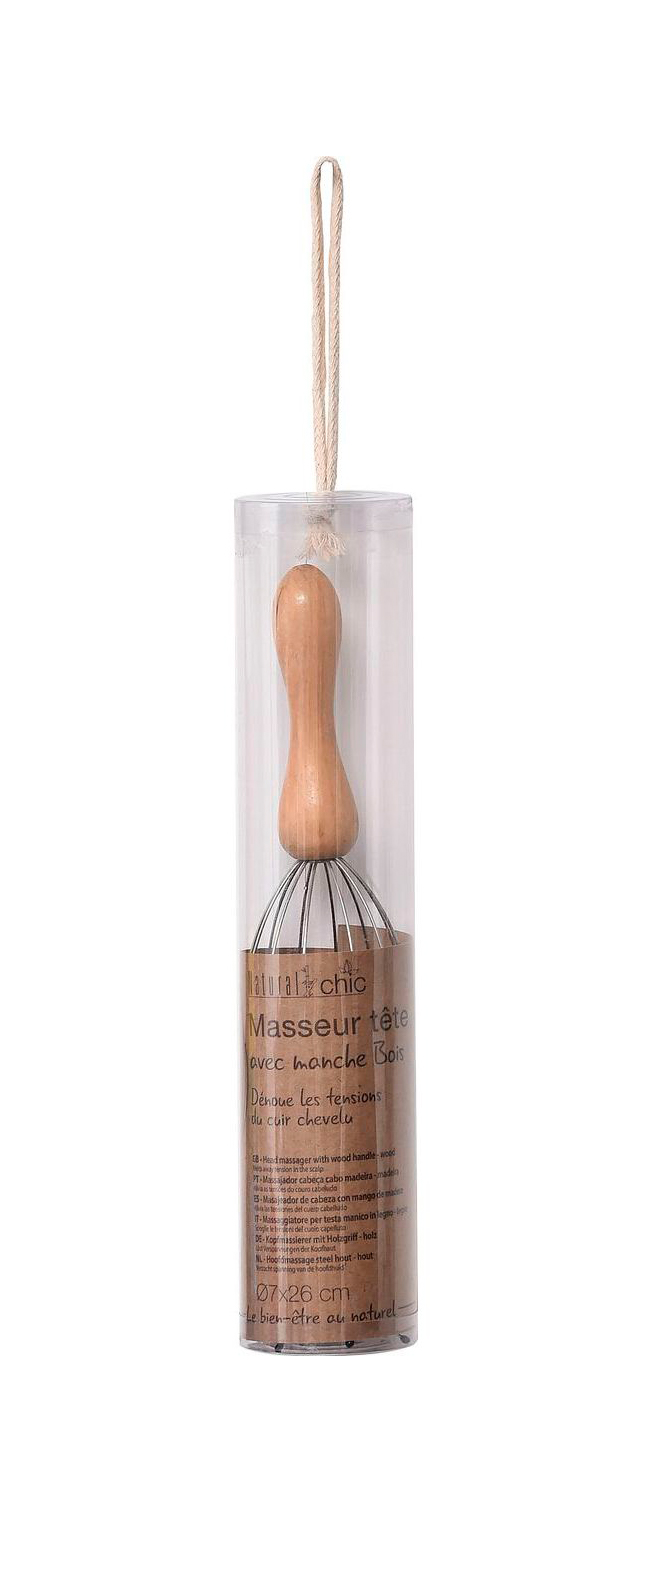 HEAD MASSAGER WITH BAMBOO HEN LE - BAMBOO